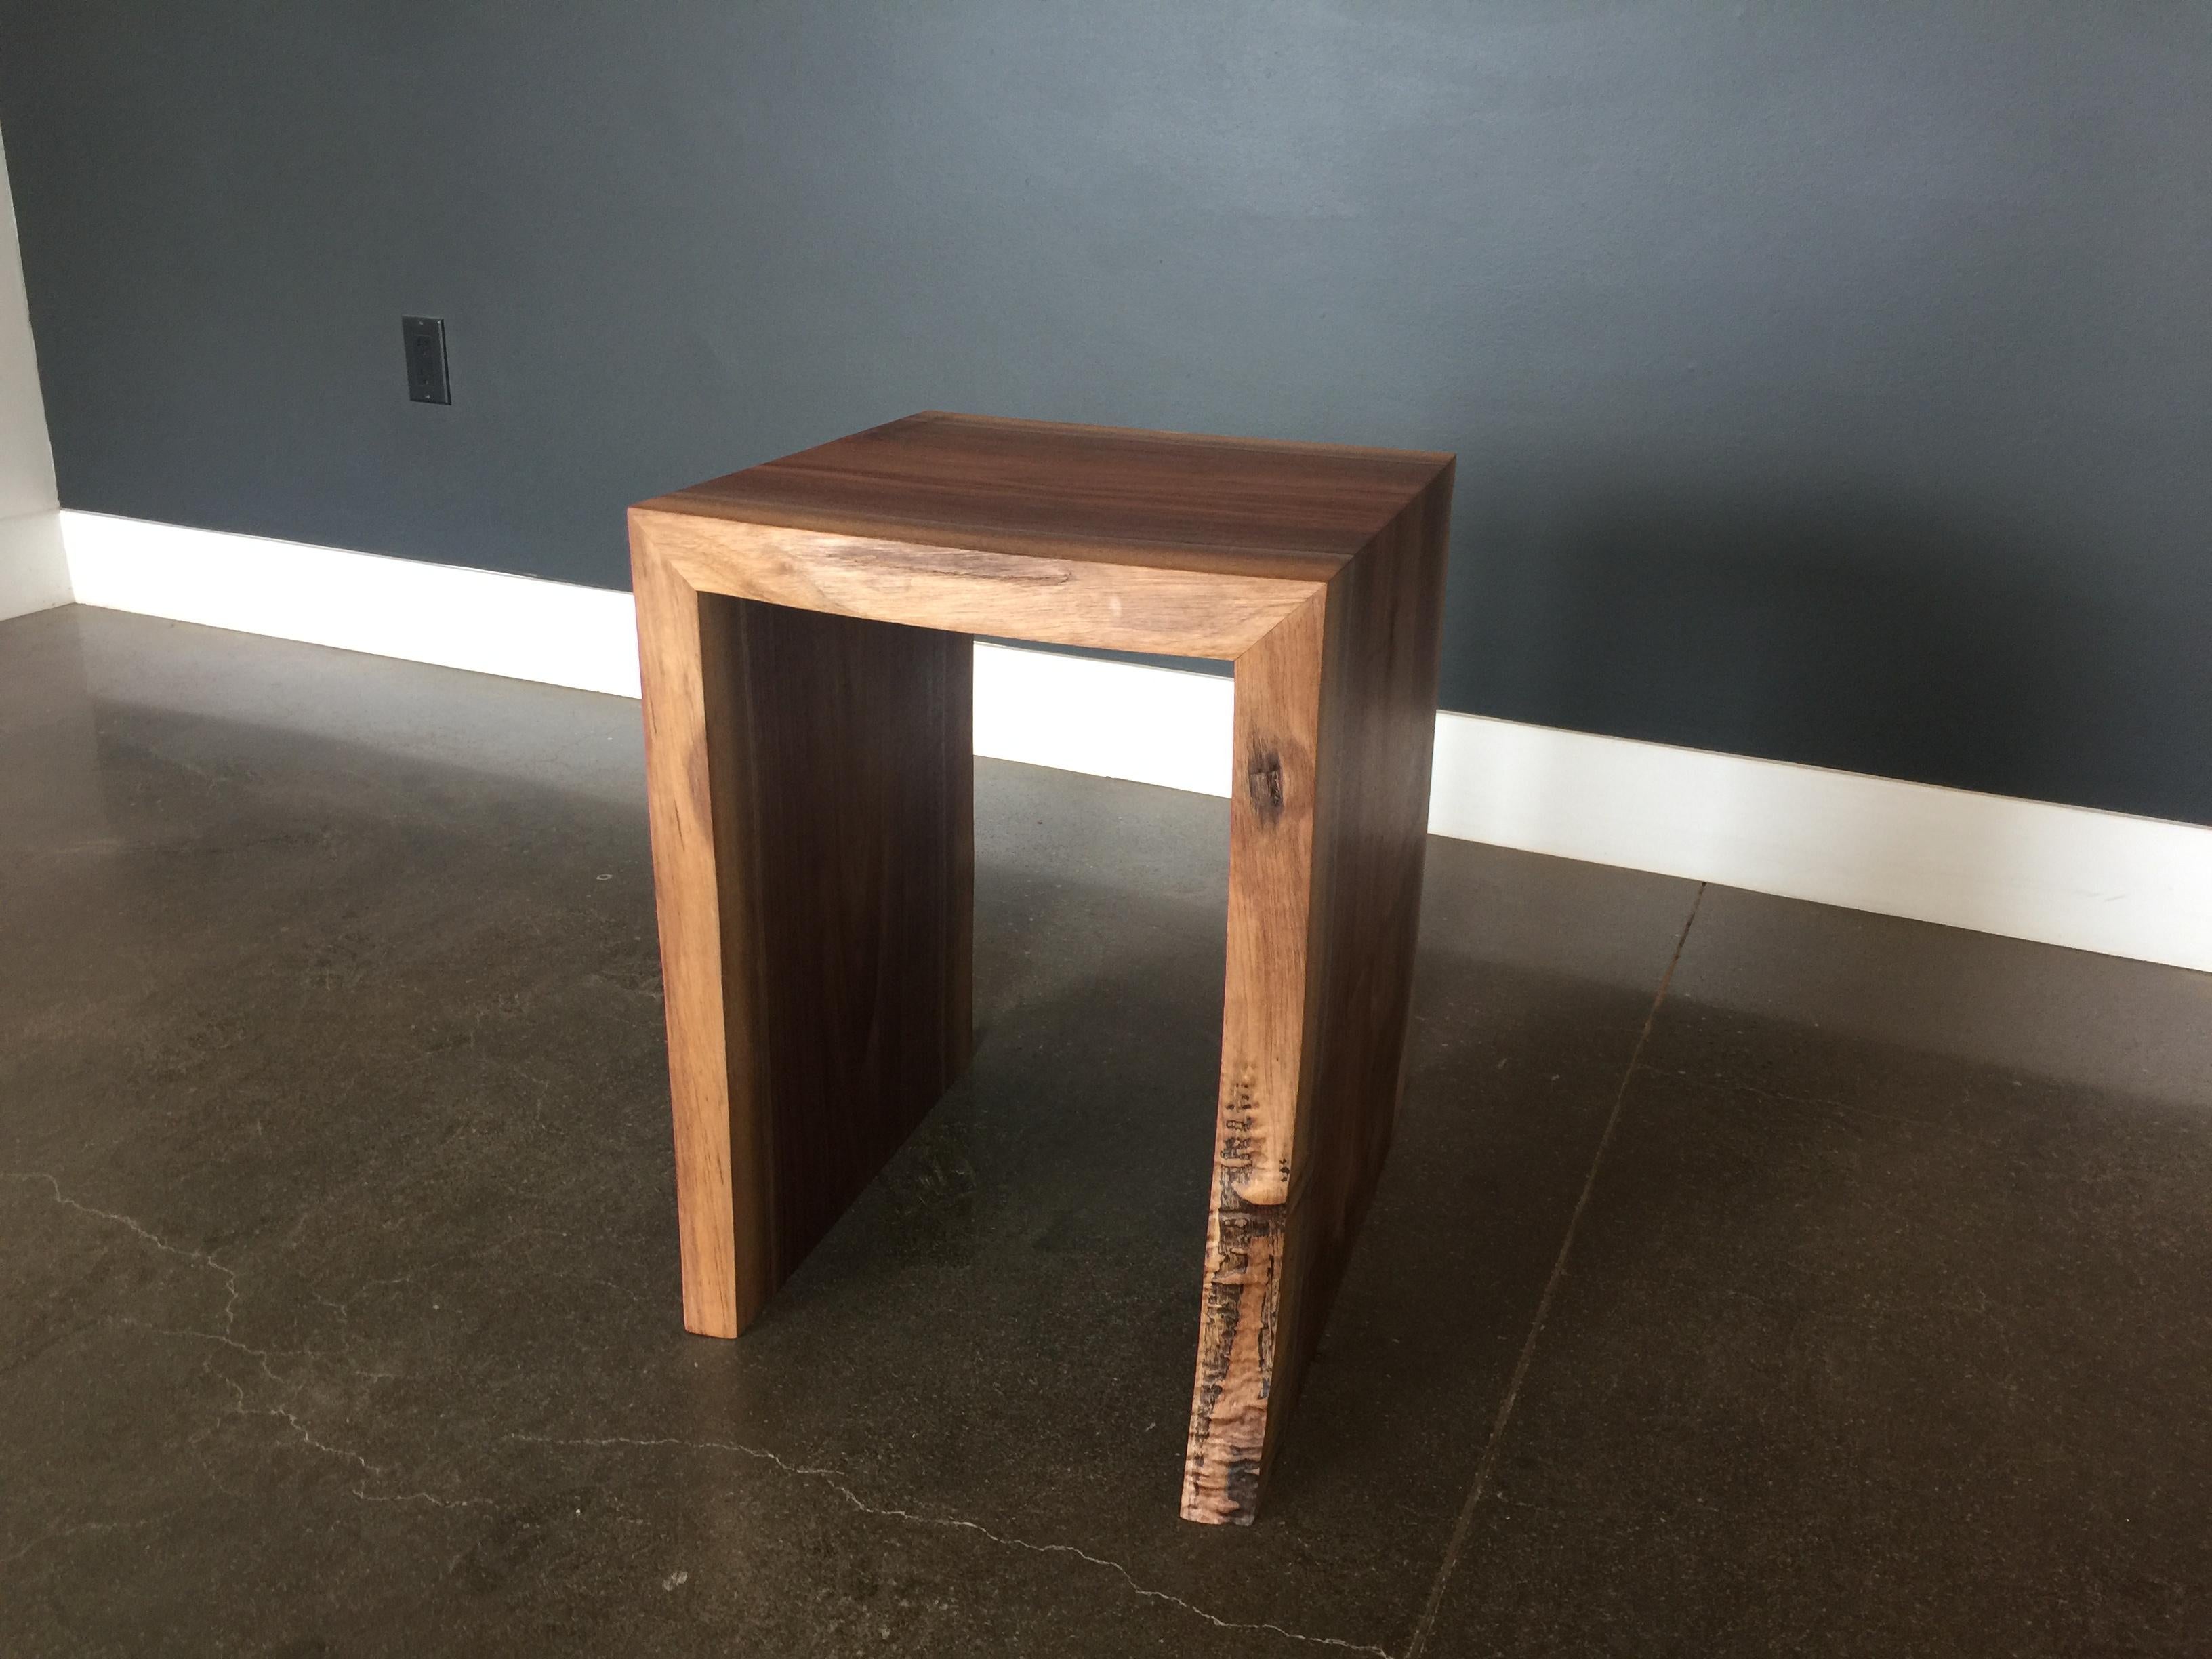 This coffee table is a live edge black walnut slab which was stained black. We have added 3 aluminum strips lengthwise. The legs are U shape aluminum base. We offer any color match stain. We make the sample and send it to you for approval. 

Bois &